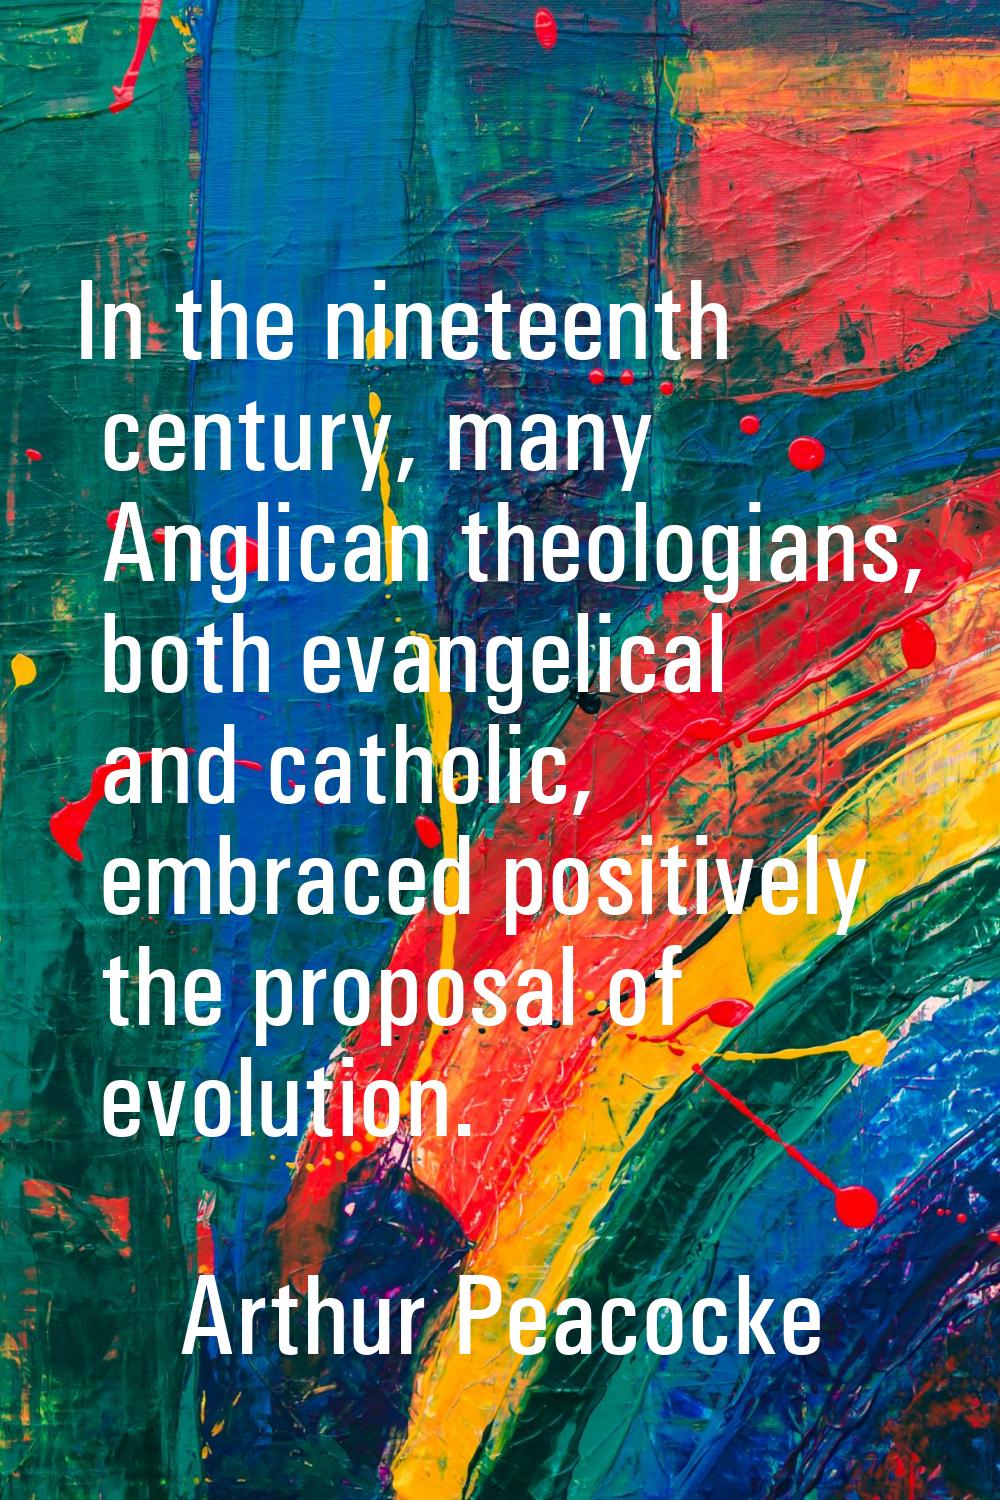 In the nineteenth century, many Anglican theologians, both evangelical and catholic, embraced posit